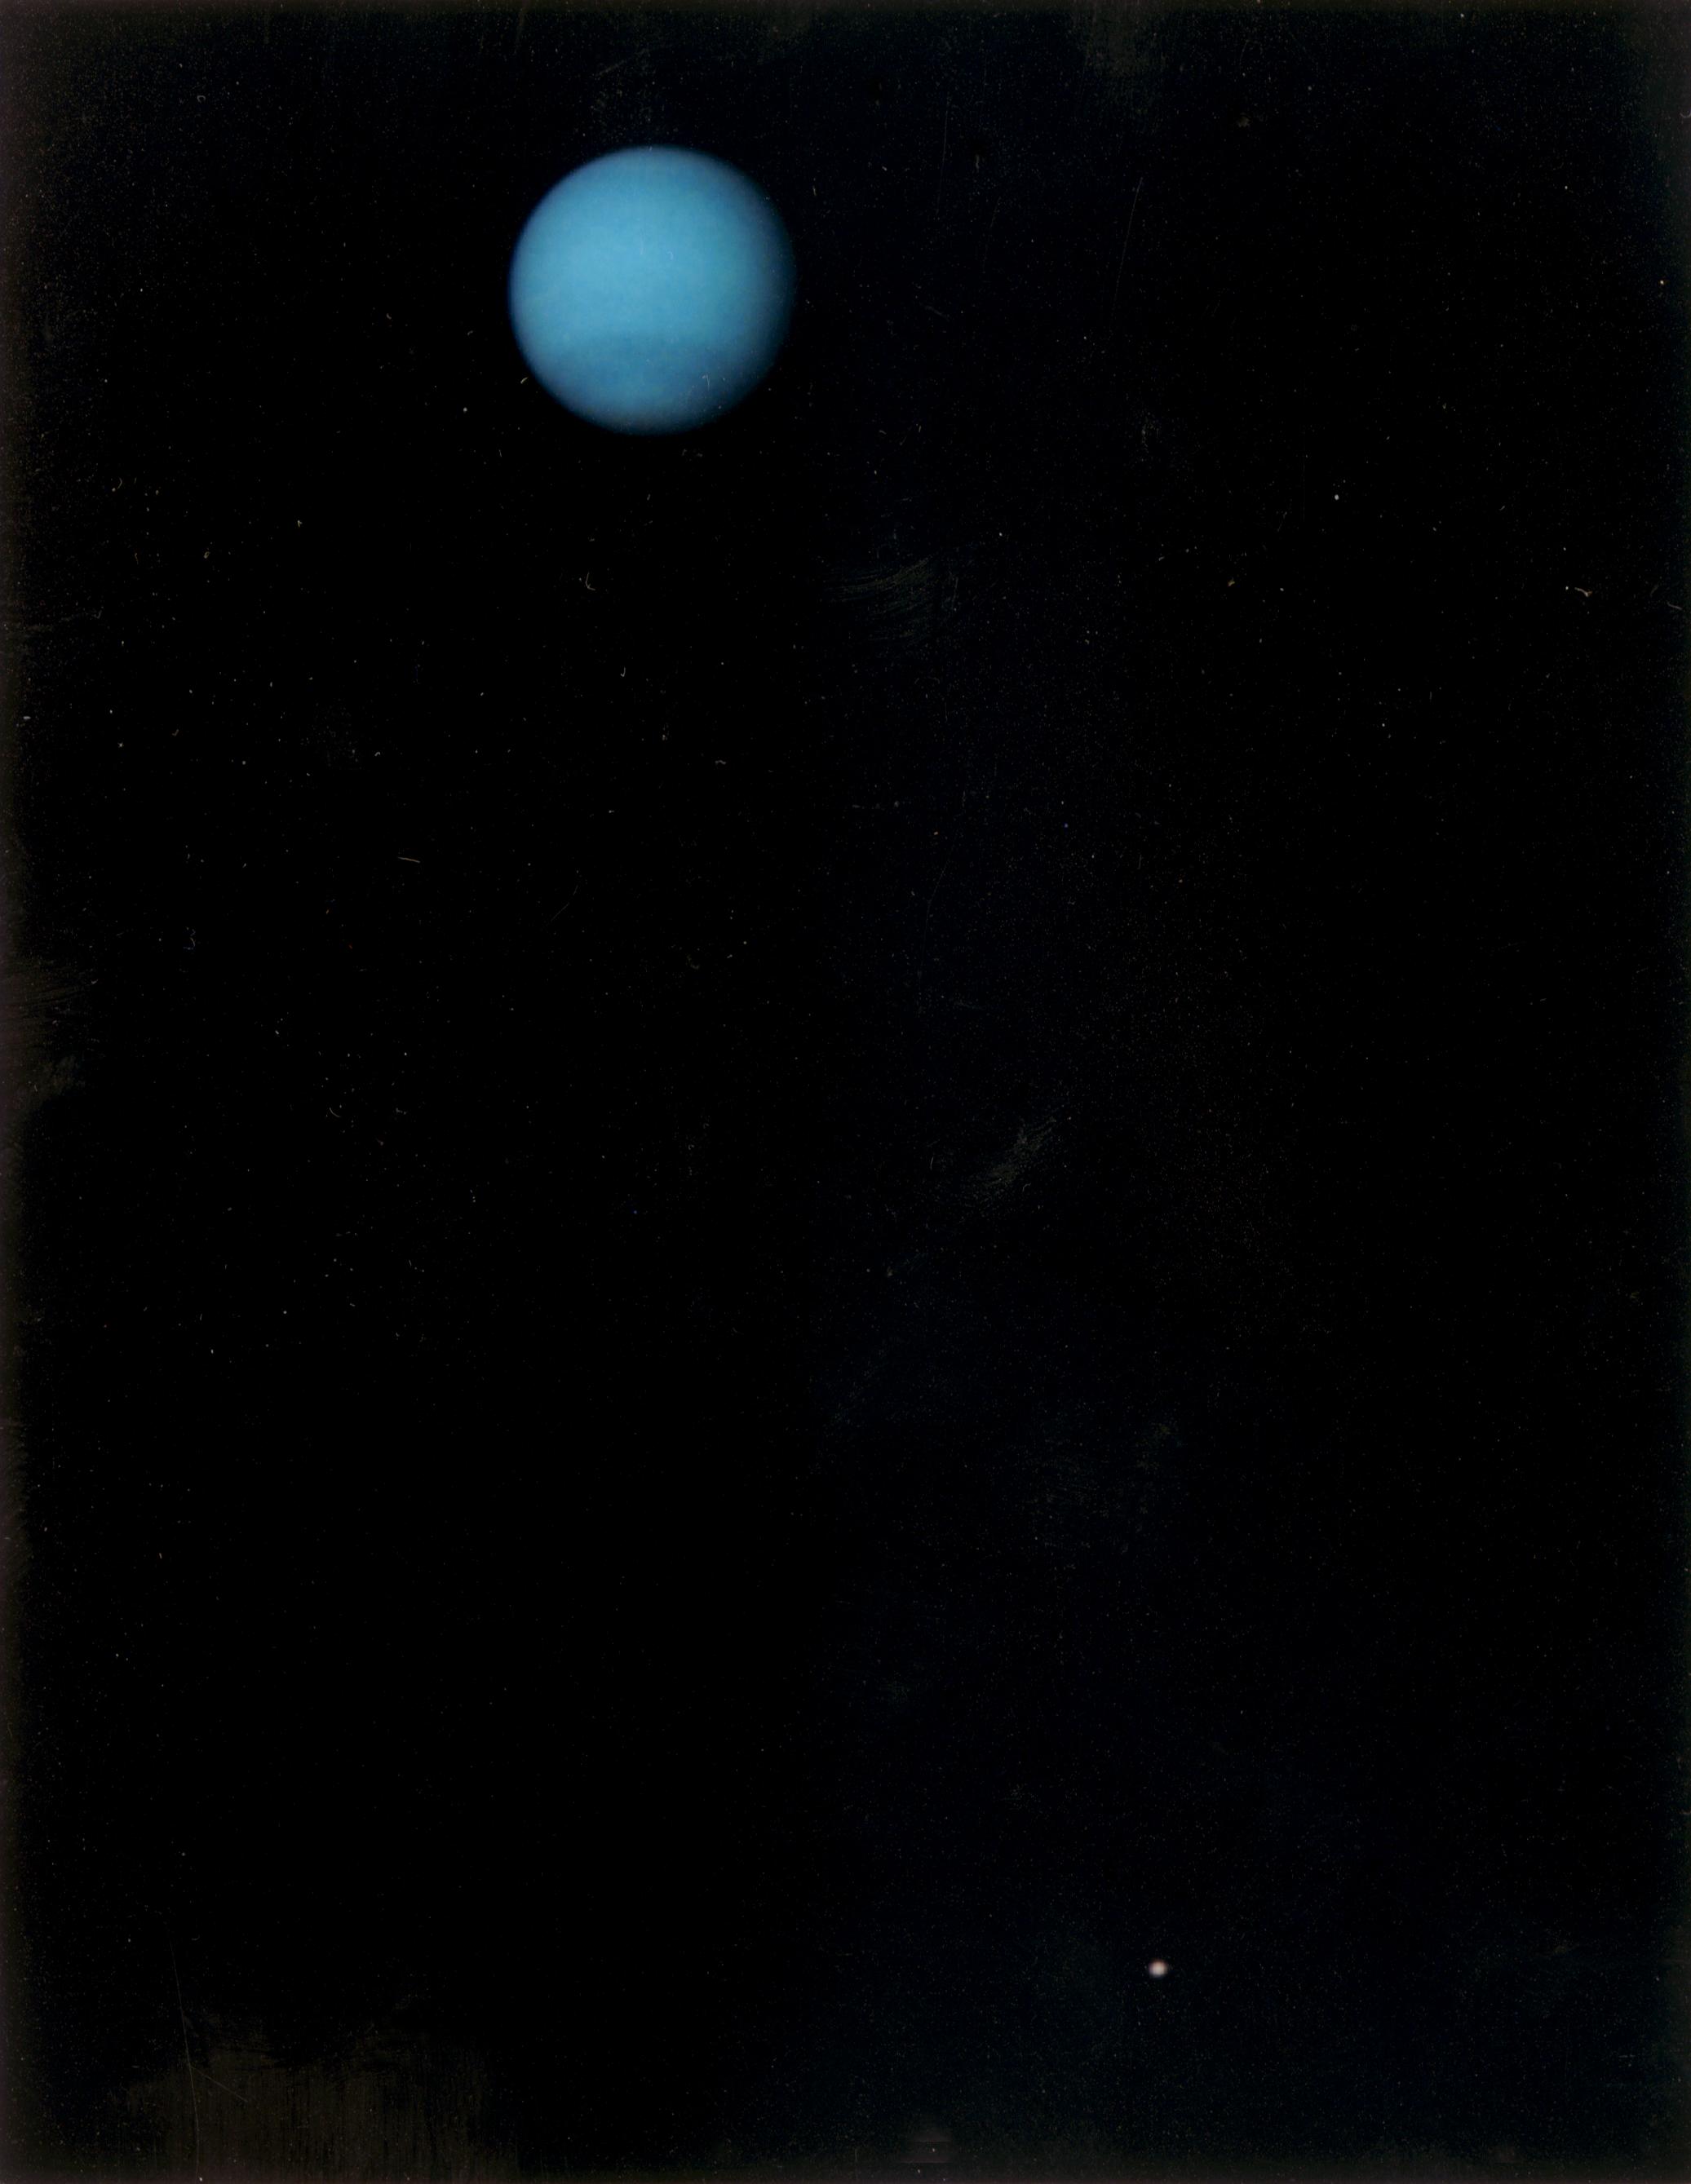 This image was returned by the Voyager 2 spacecraft on July 3, 1989, when it was 76 million kilometers (47 million miles) from Neptune.